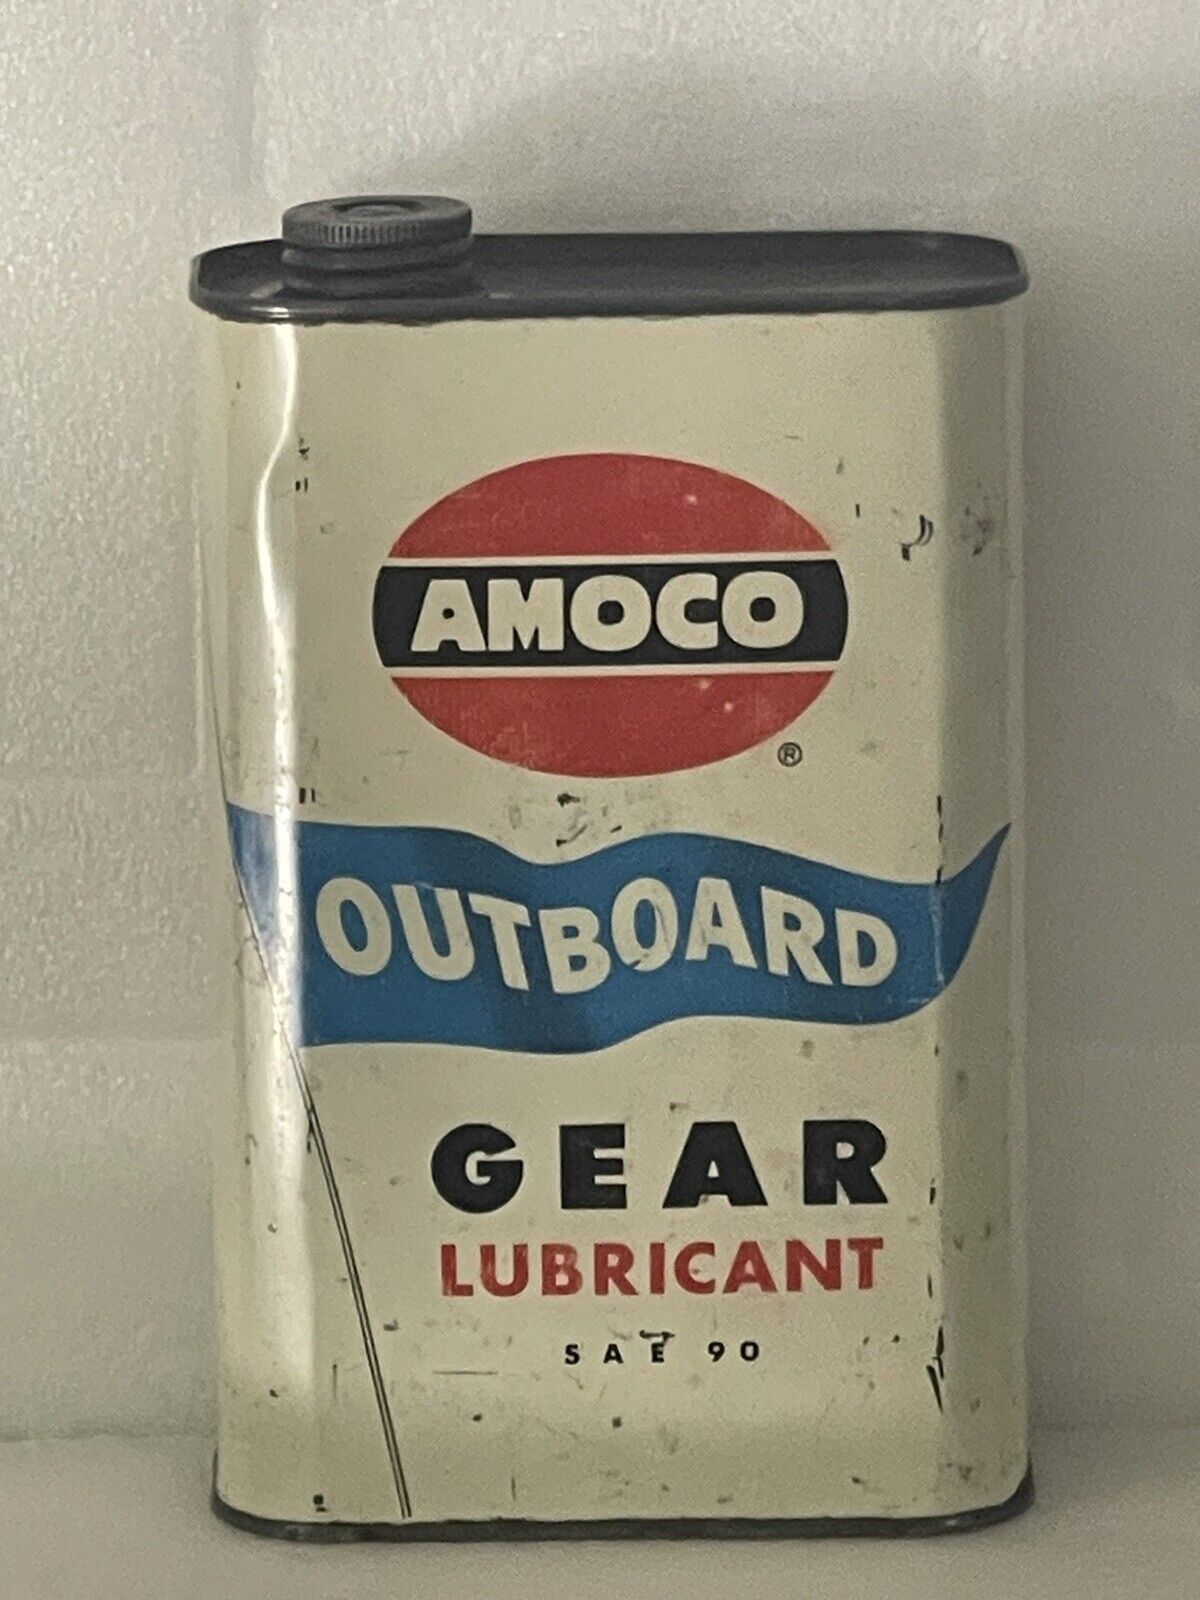 Amoco outboard motor oil can,vintage from the 1950s with graphics,fair shape.